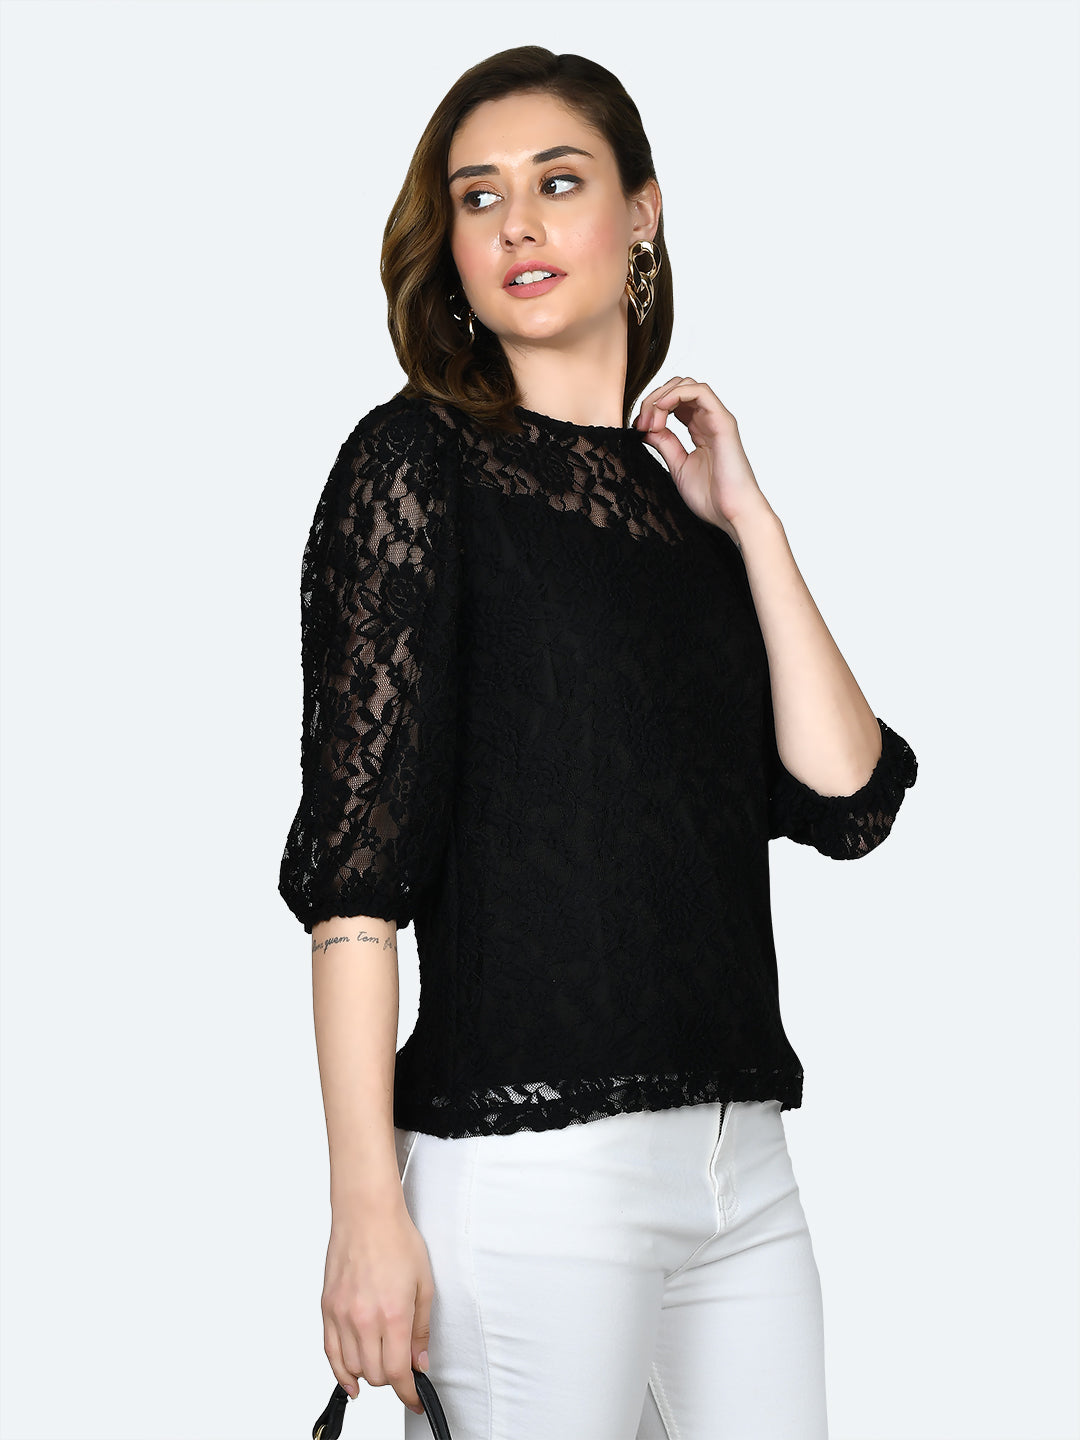 Black Lace Top For Women